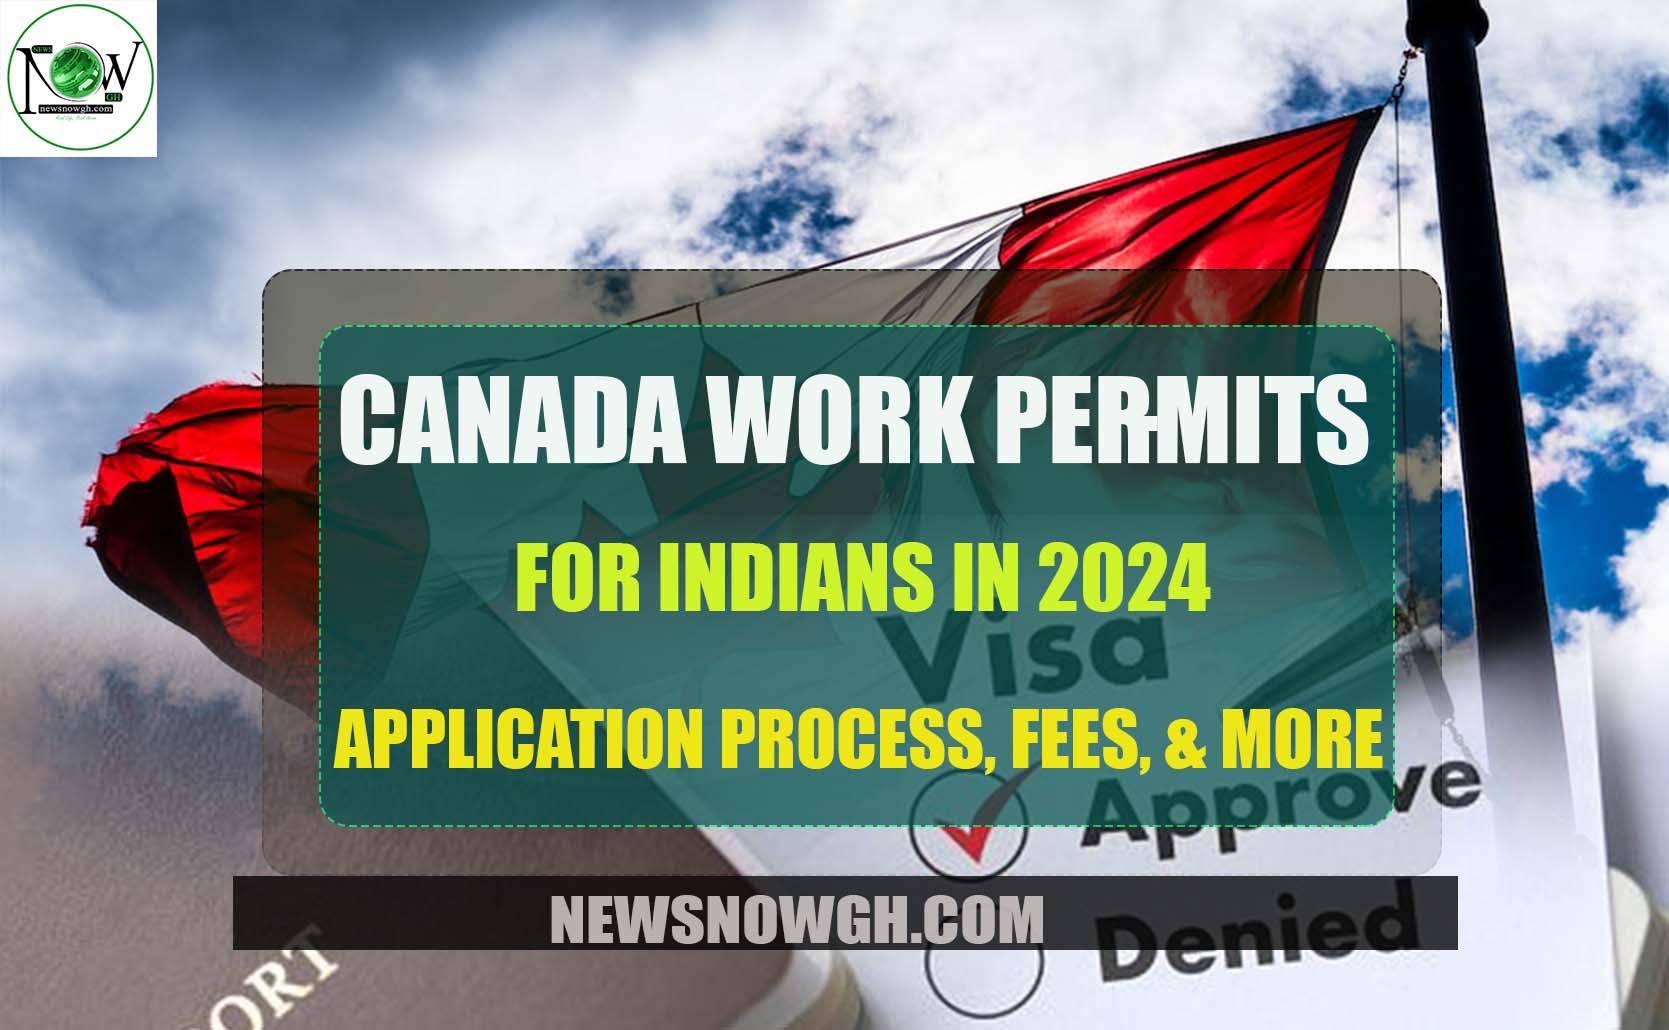 Canada Work Permits for Indians 2024 Fees, Application Process